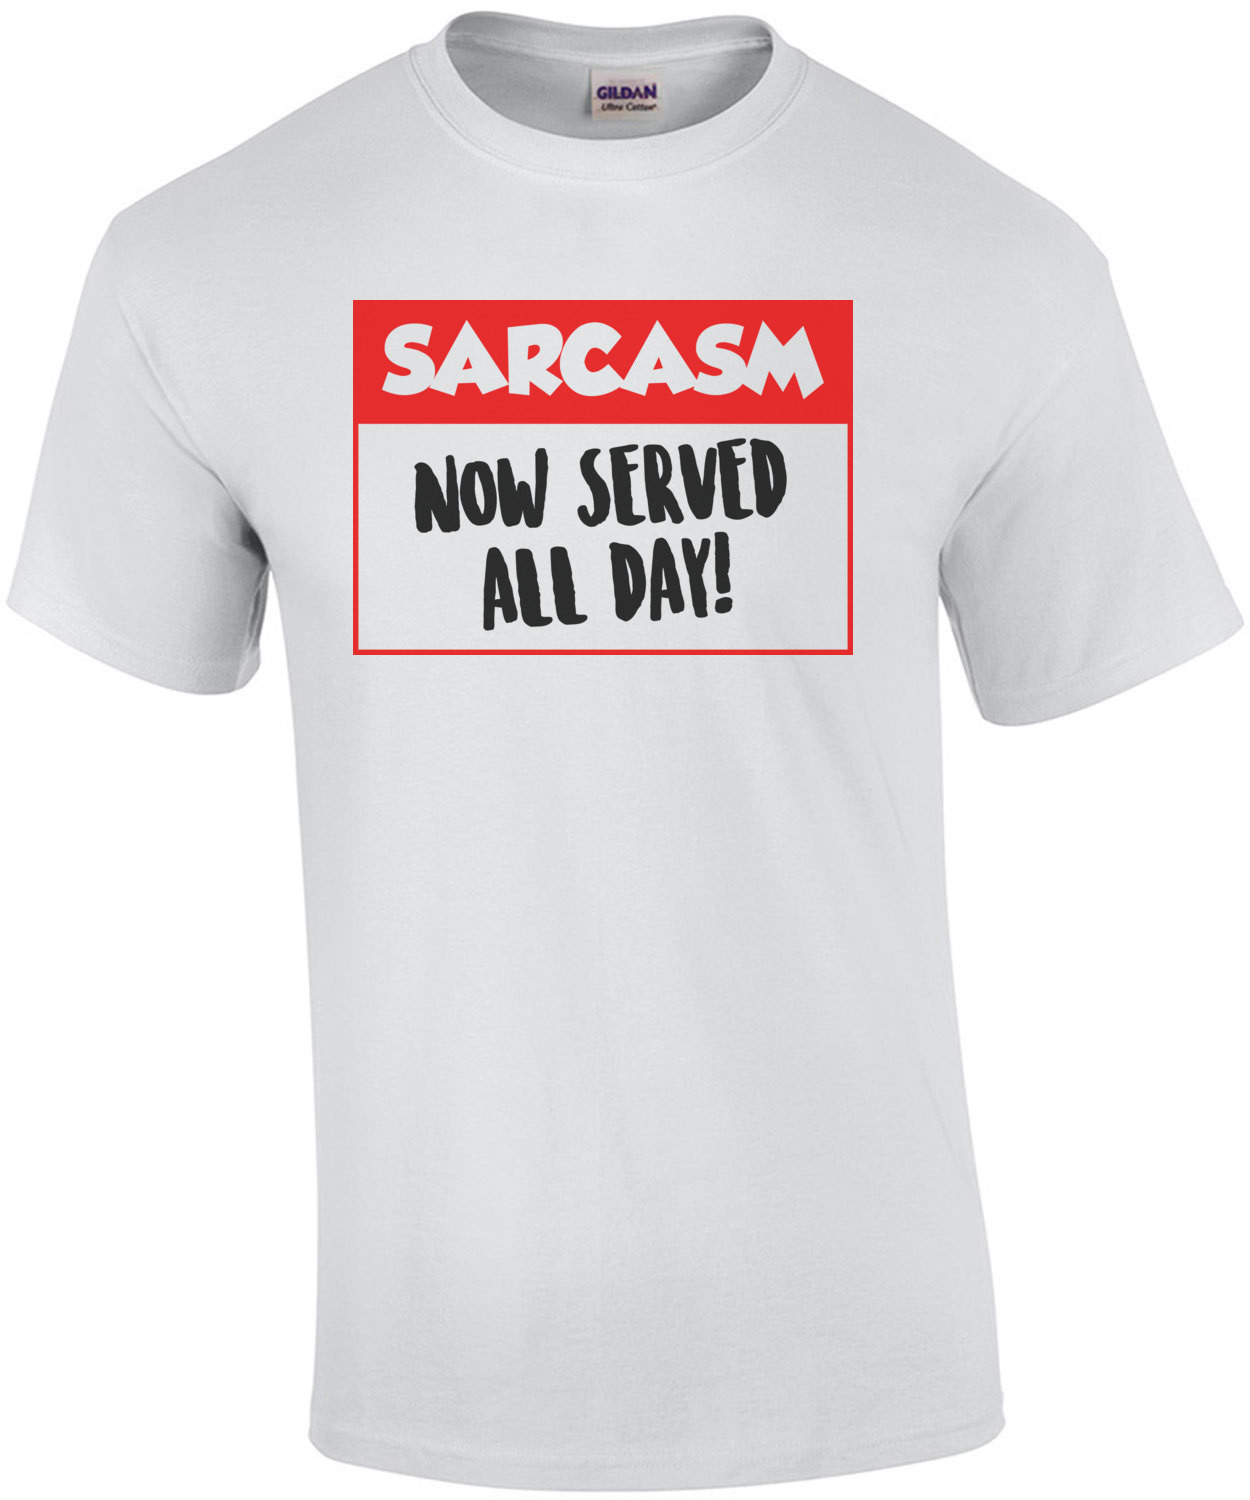 Sarcasm Now Served All Day T-Shirt